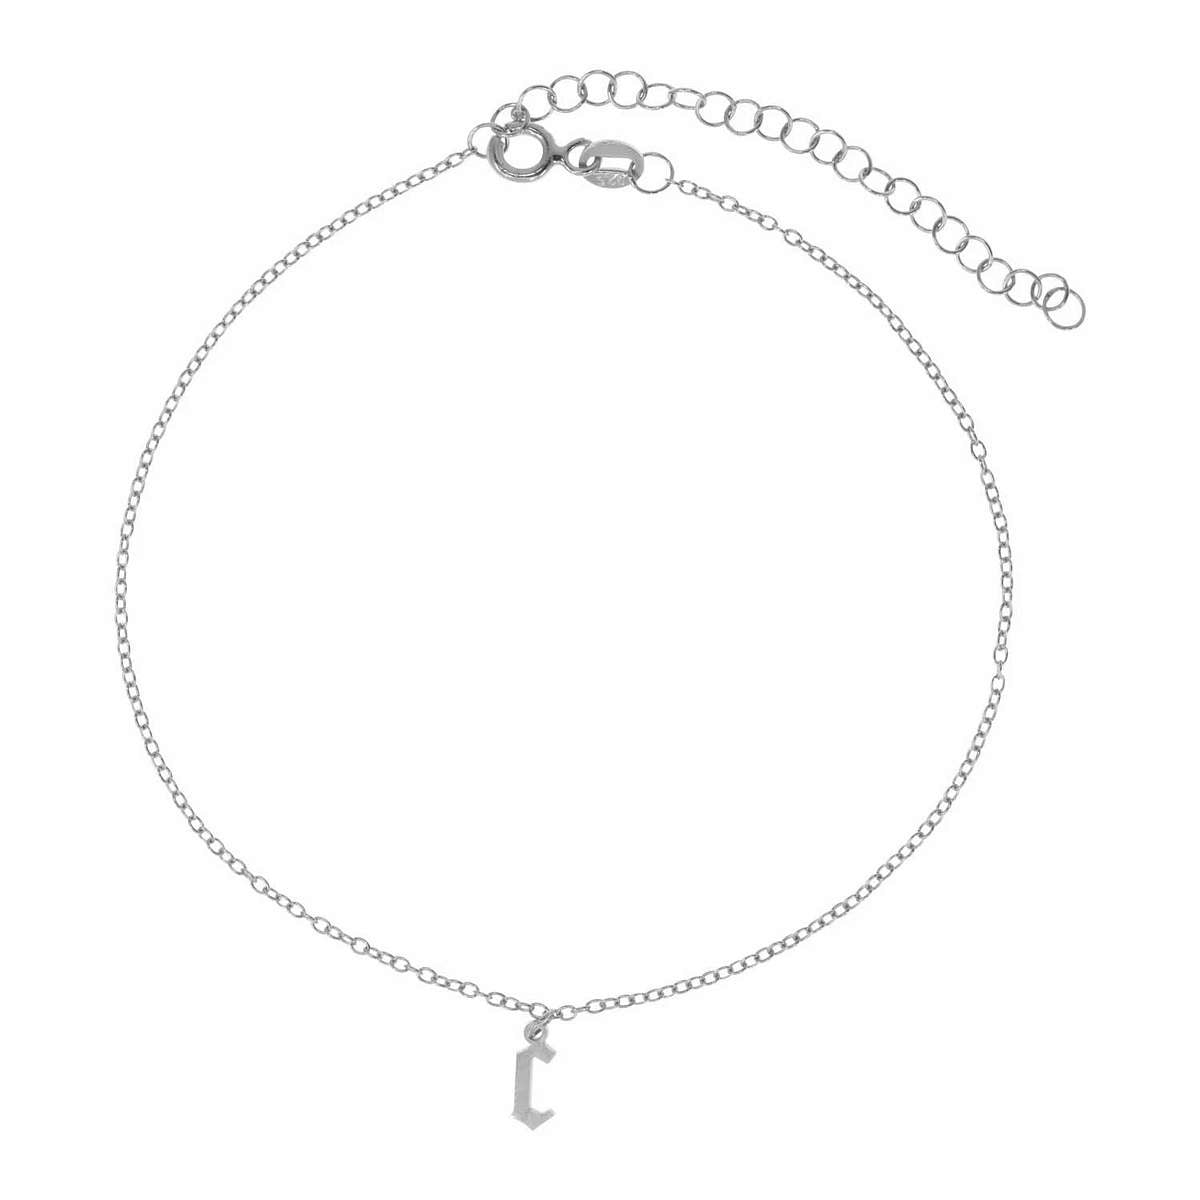 The MVP Initial Anklet